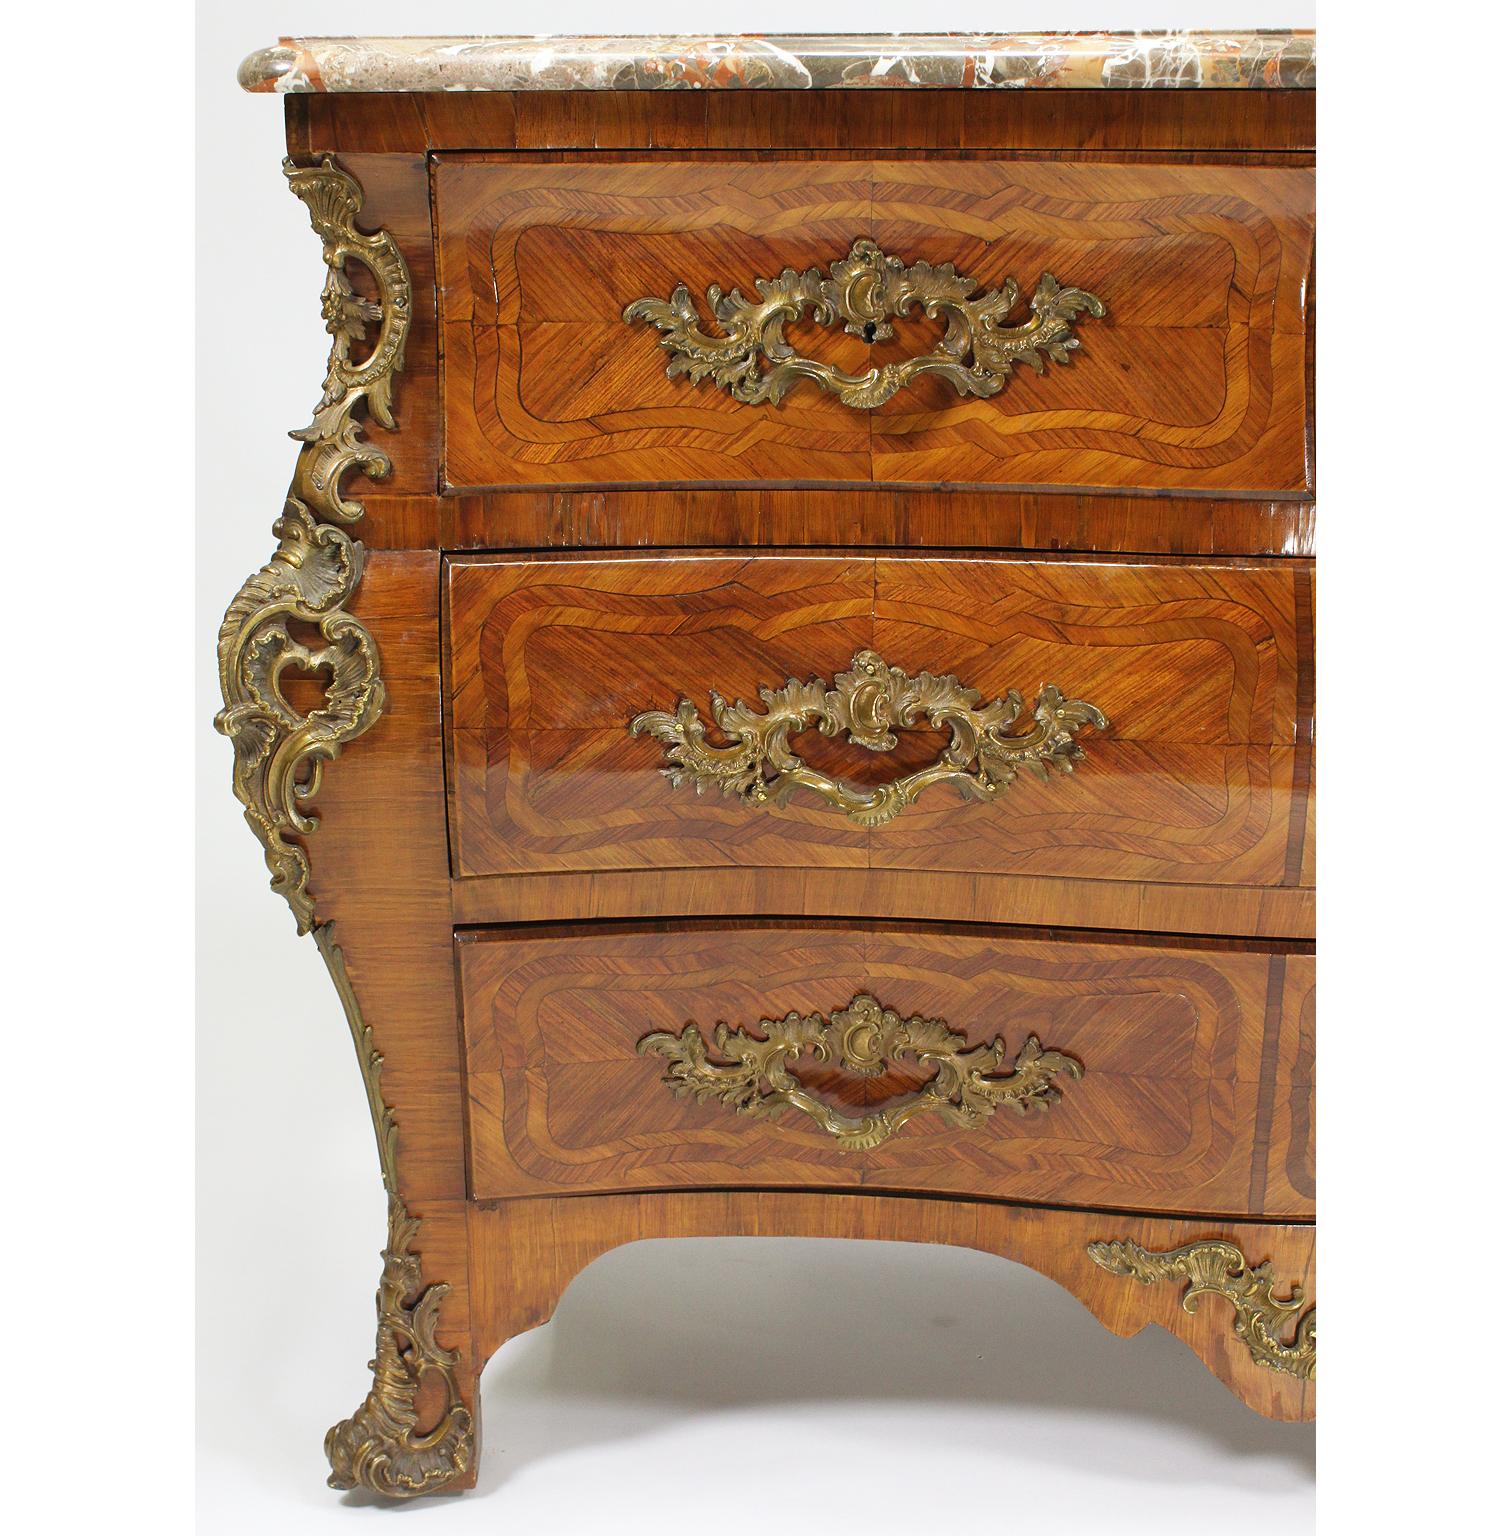 Regency Revival French Regency 19th/20th Century Louis XV/XVI Style Gilt-Bronze Mounted Commode For Sale